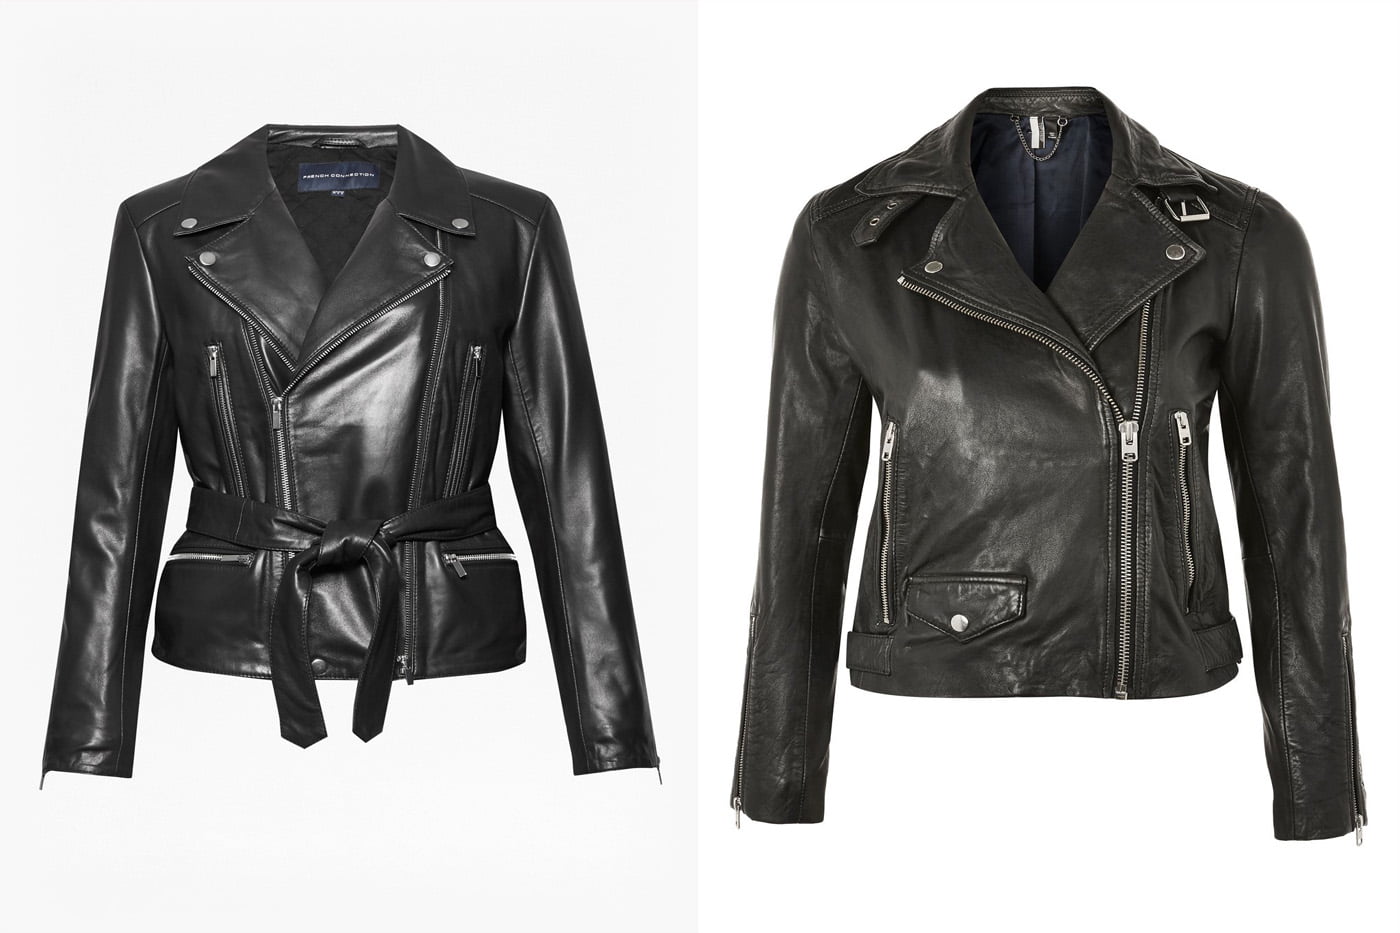 The Best Leather Biker Jackets on The High Street